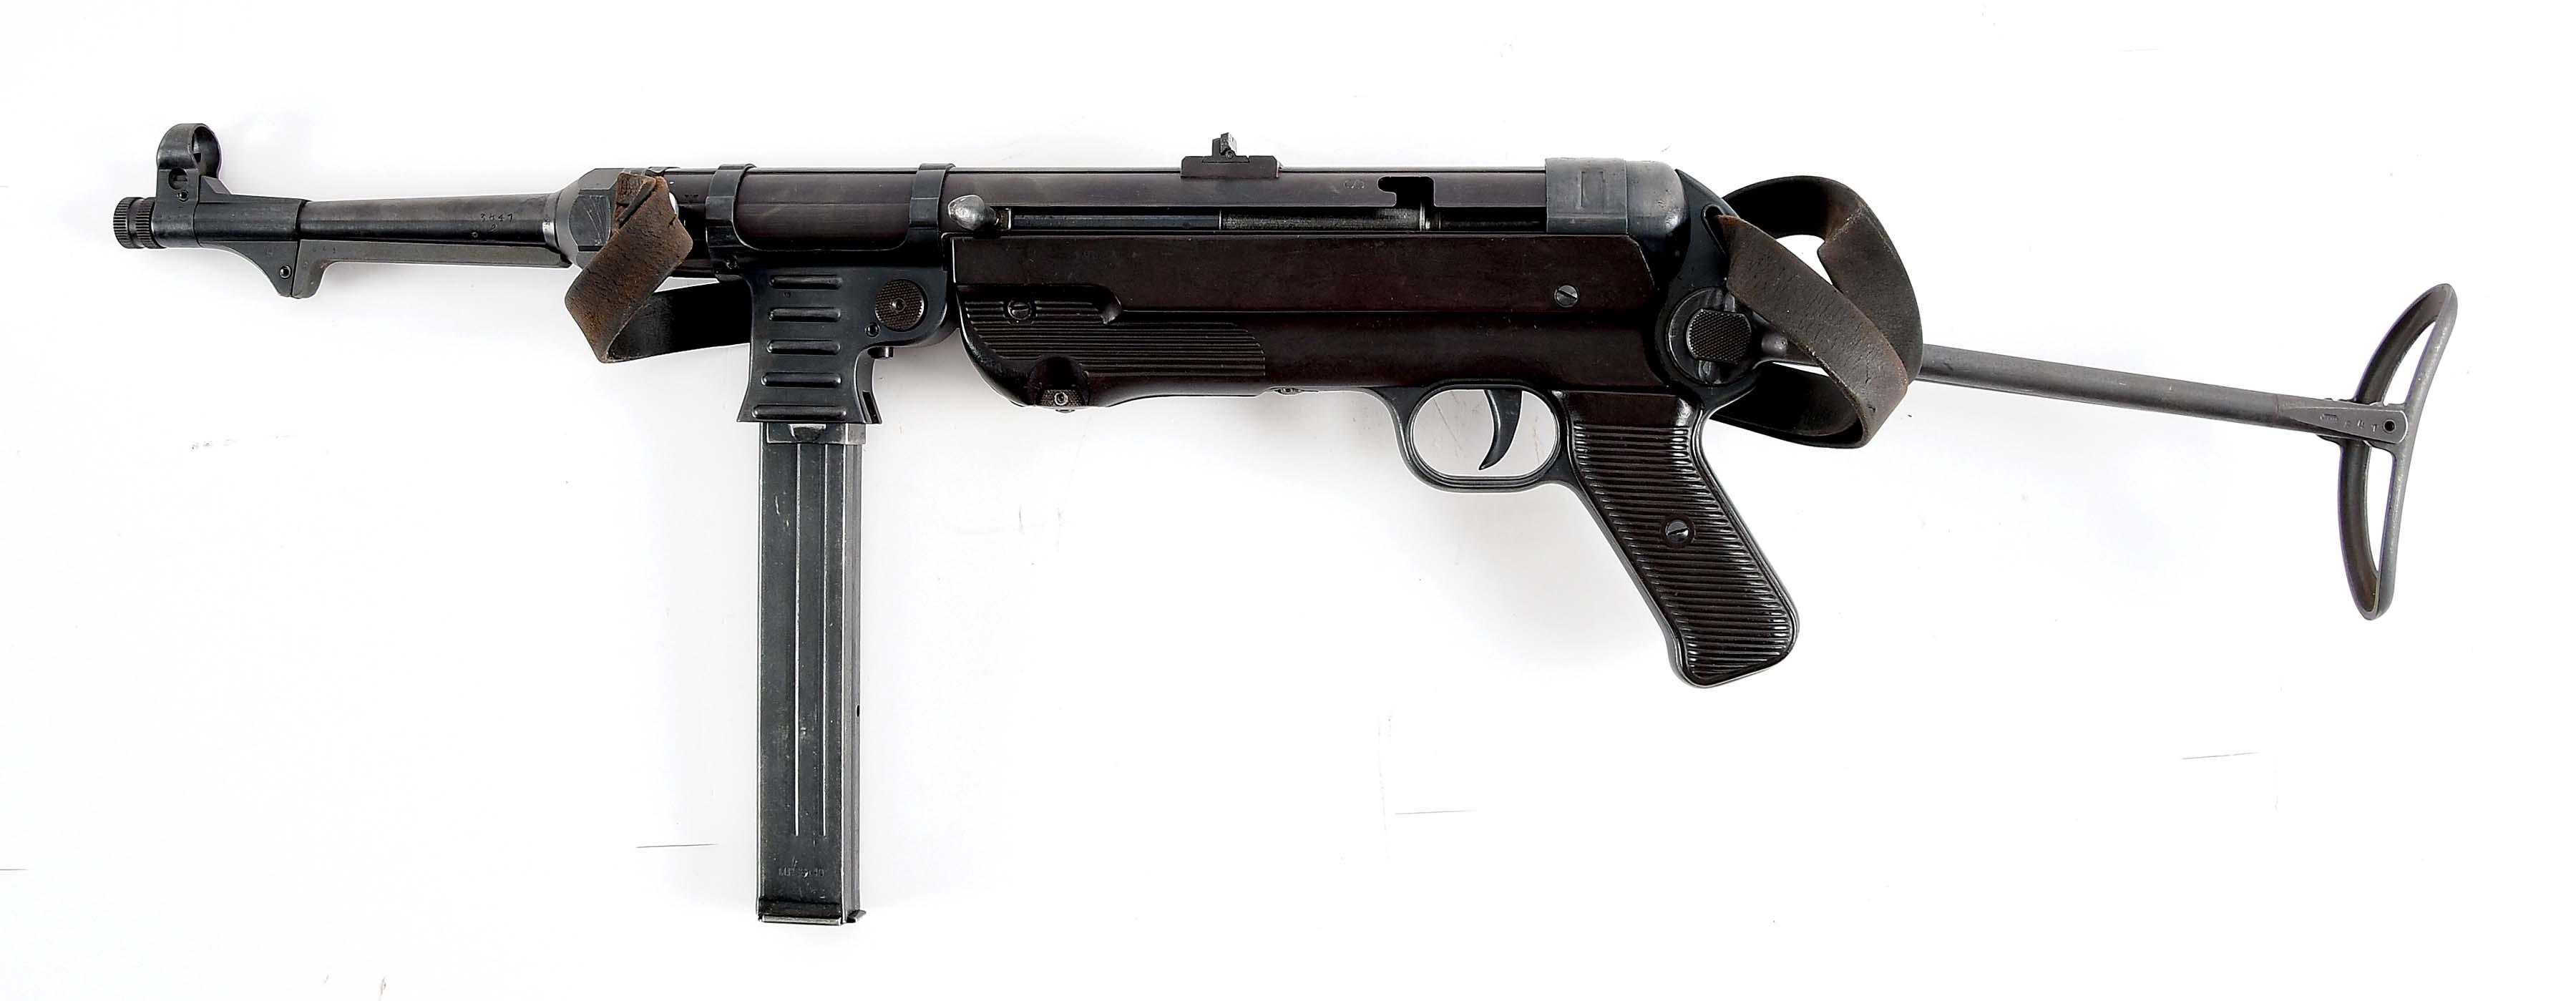 (N) EXTREMELY ATTRACTIVE MATCHING NUMBERS “ERB” REGISTERED TUBE GERMAN WORLD WAR II MP-40 MACHINE GU